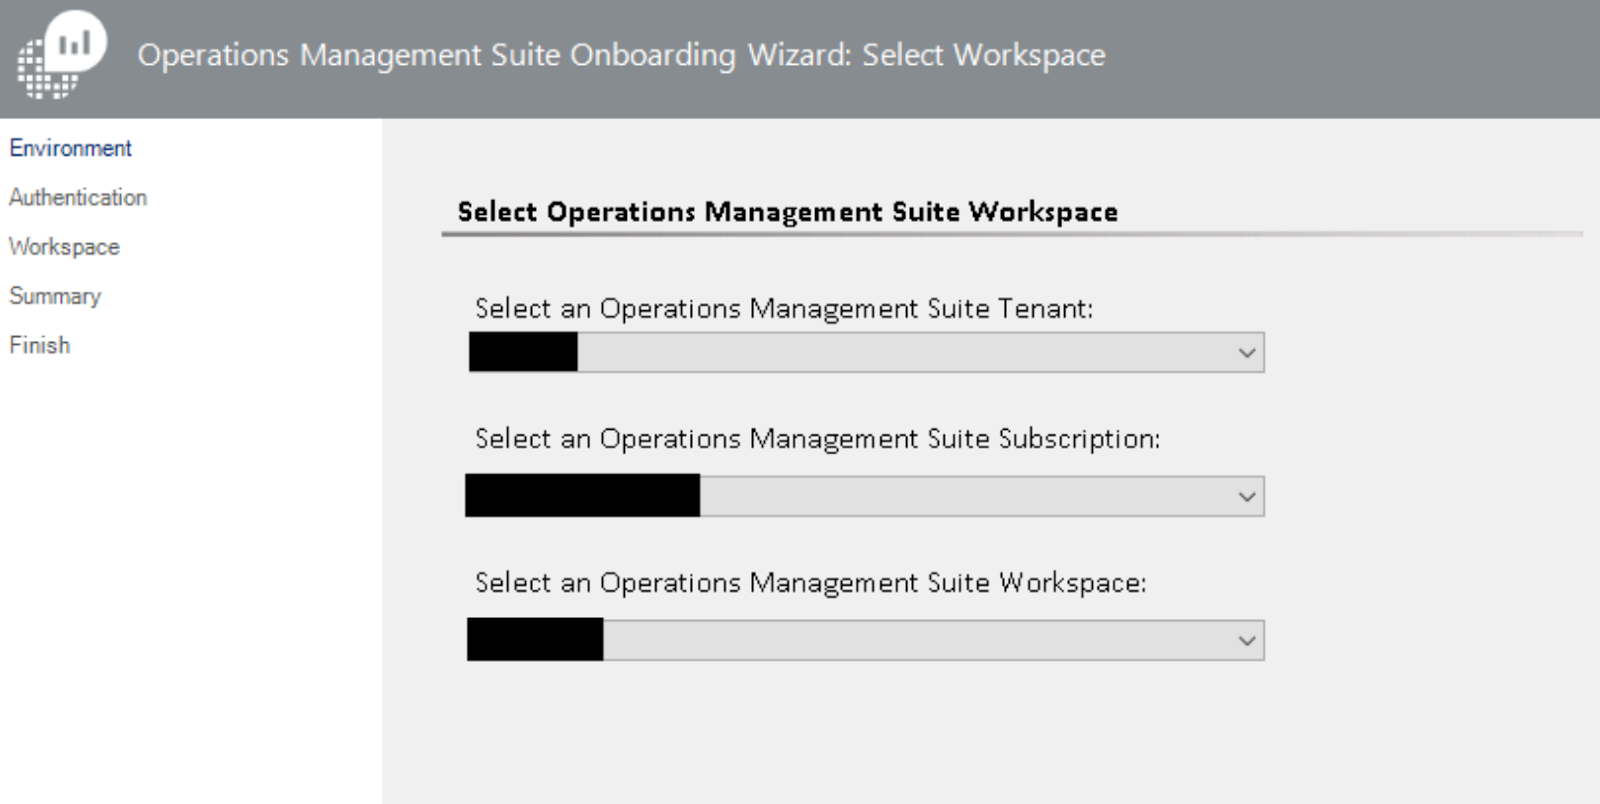 Operations Management Suite Onboarding Wizard: Select Workspace